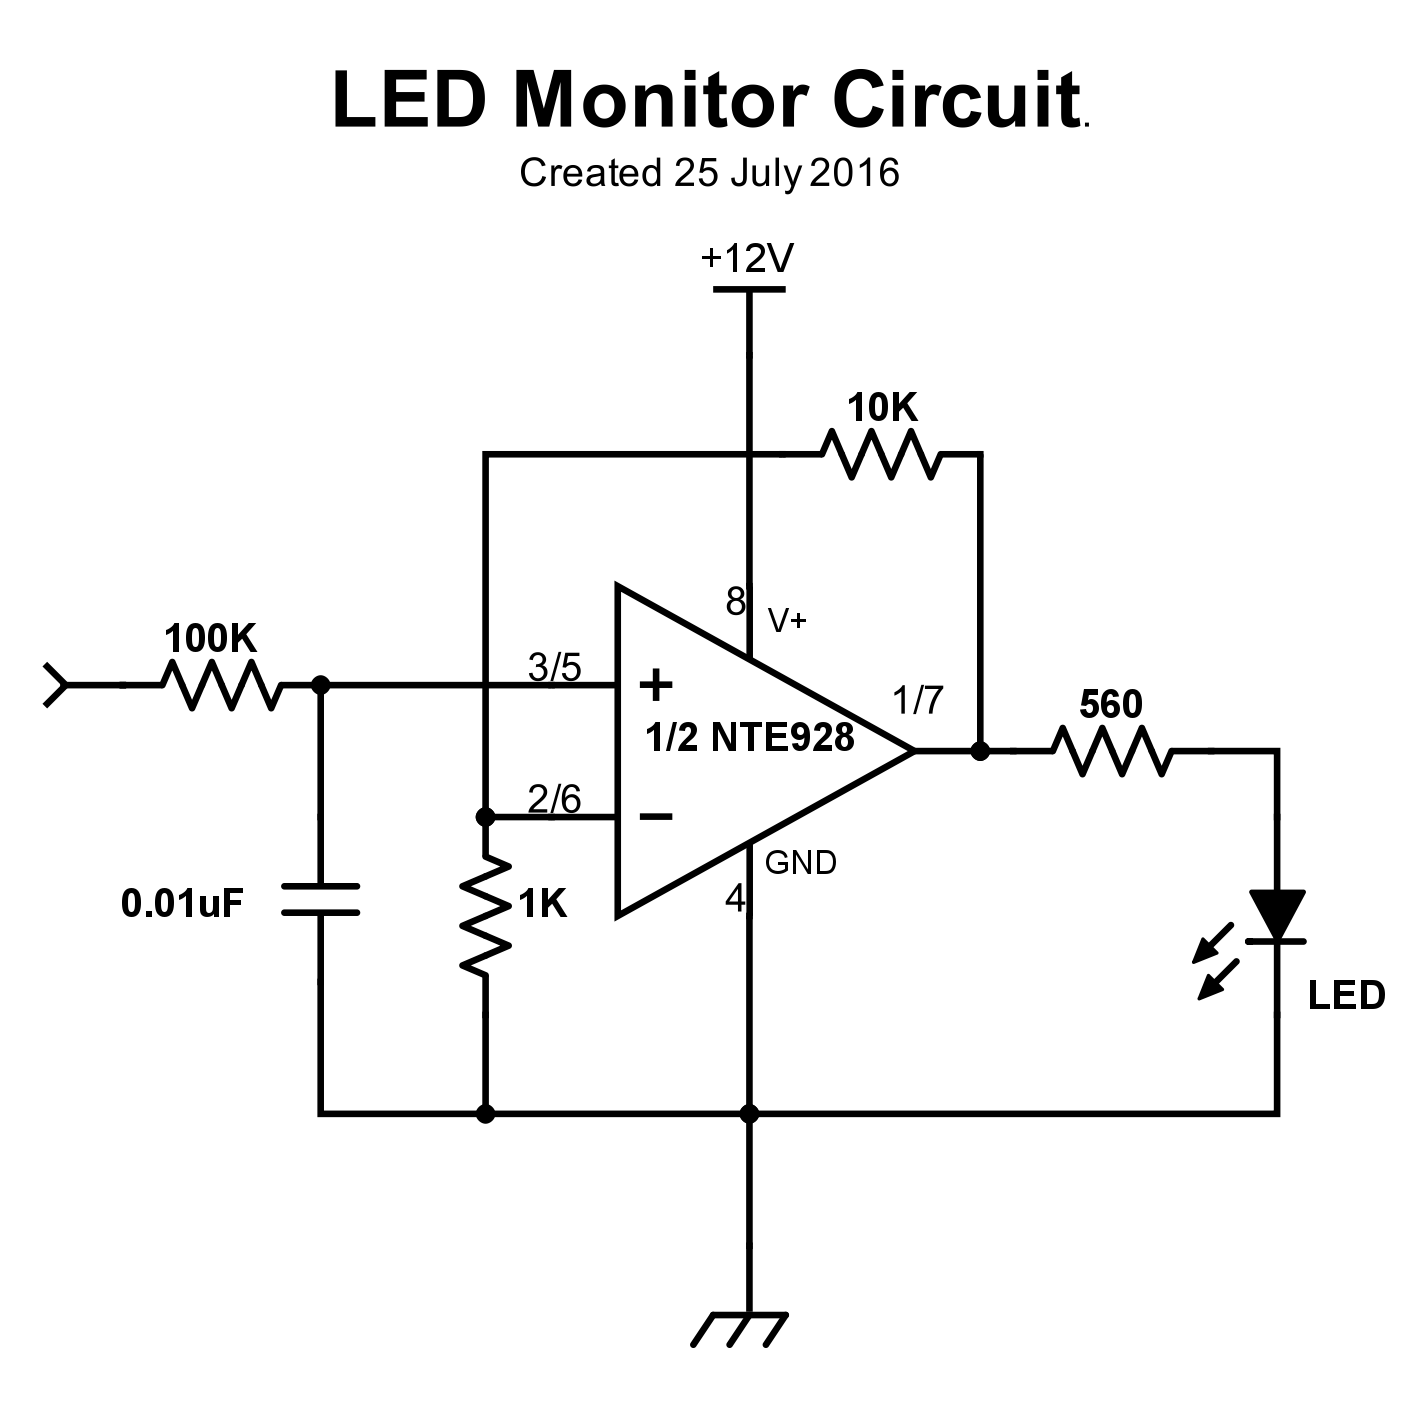 LED monitor circuit for one channel